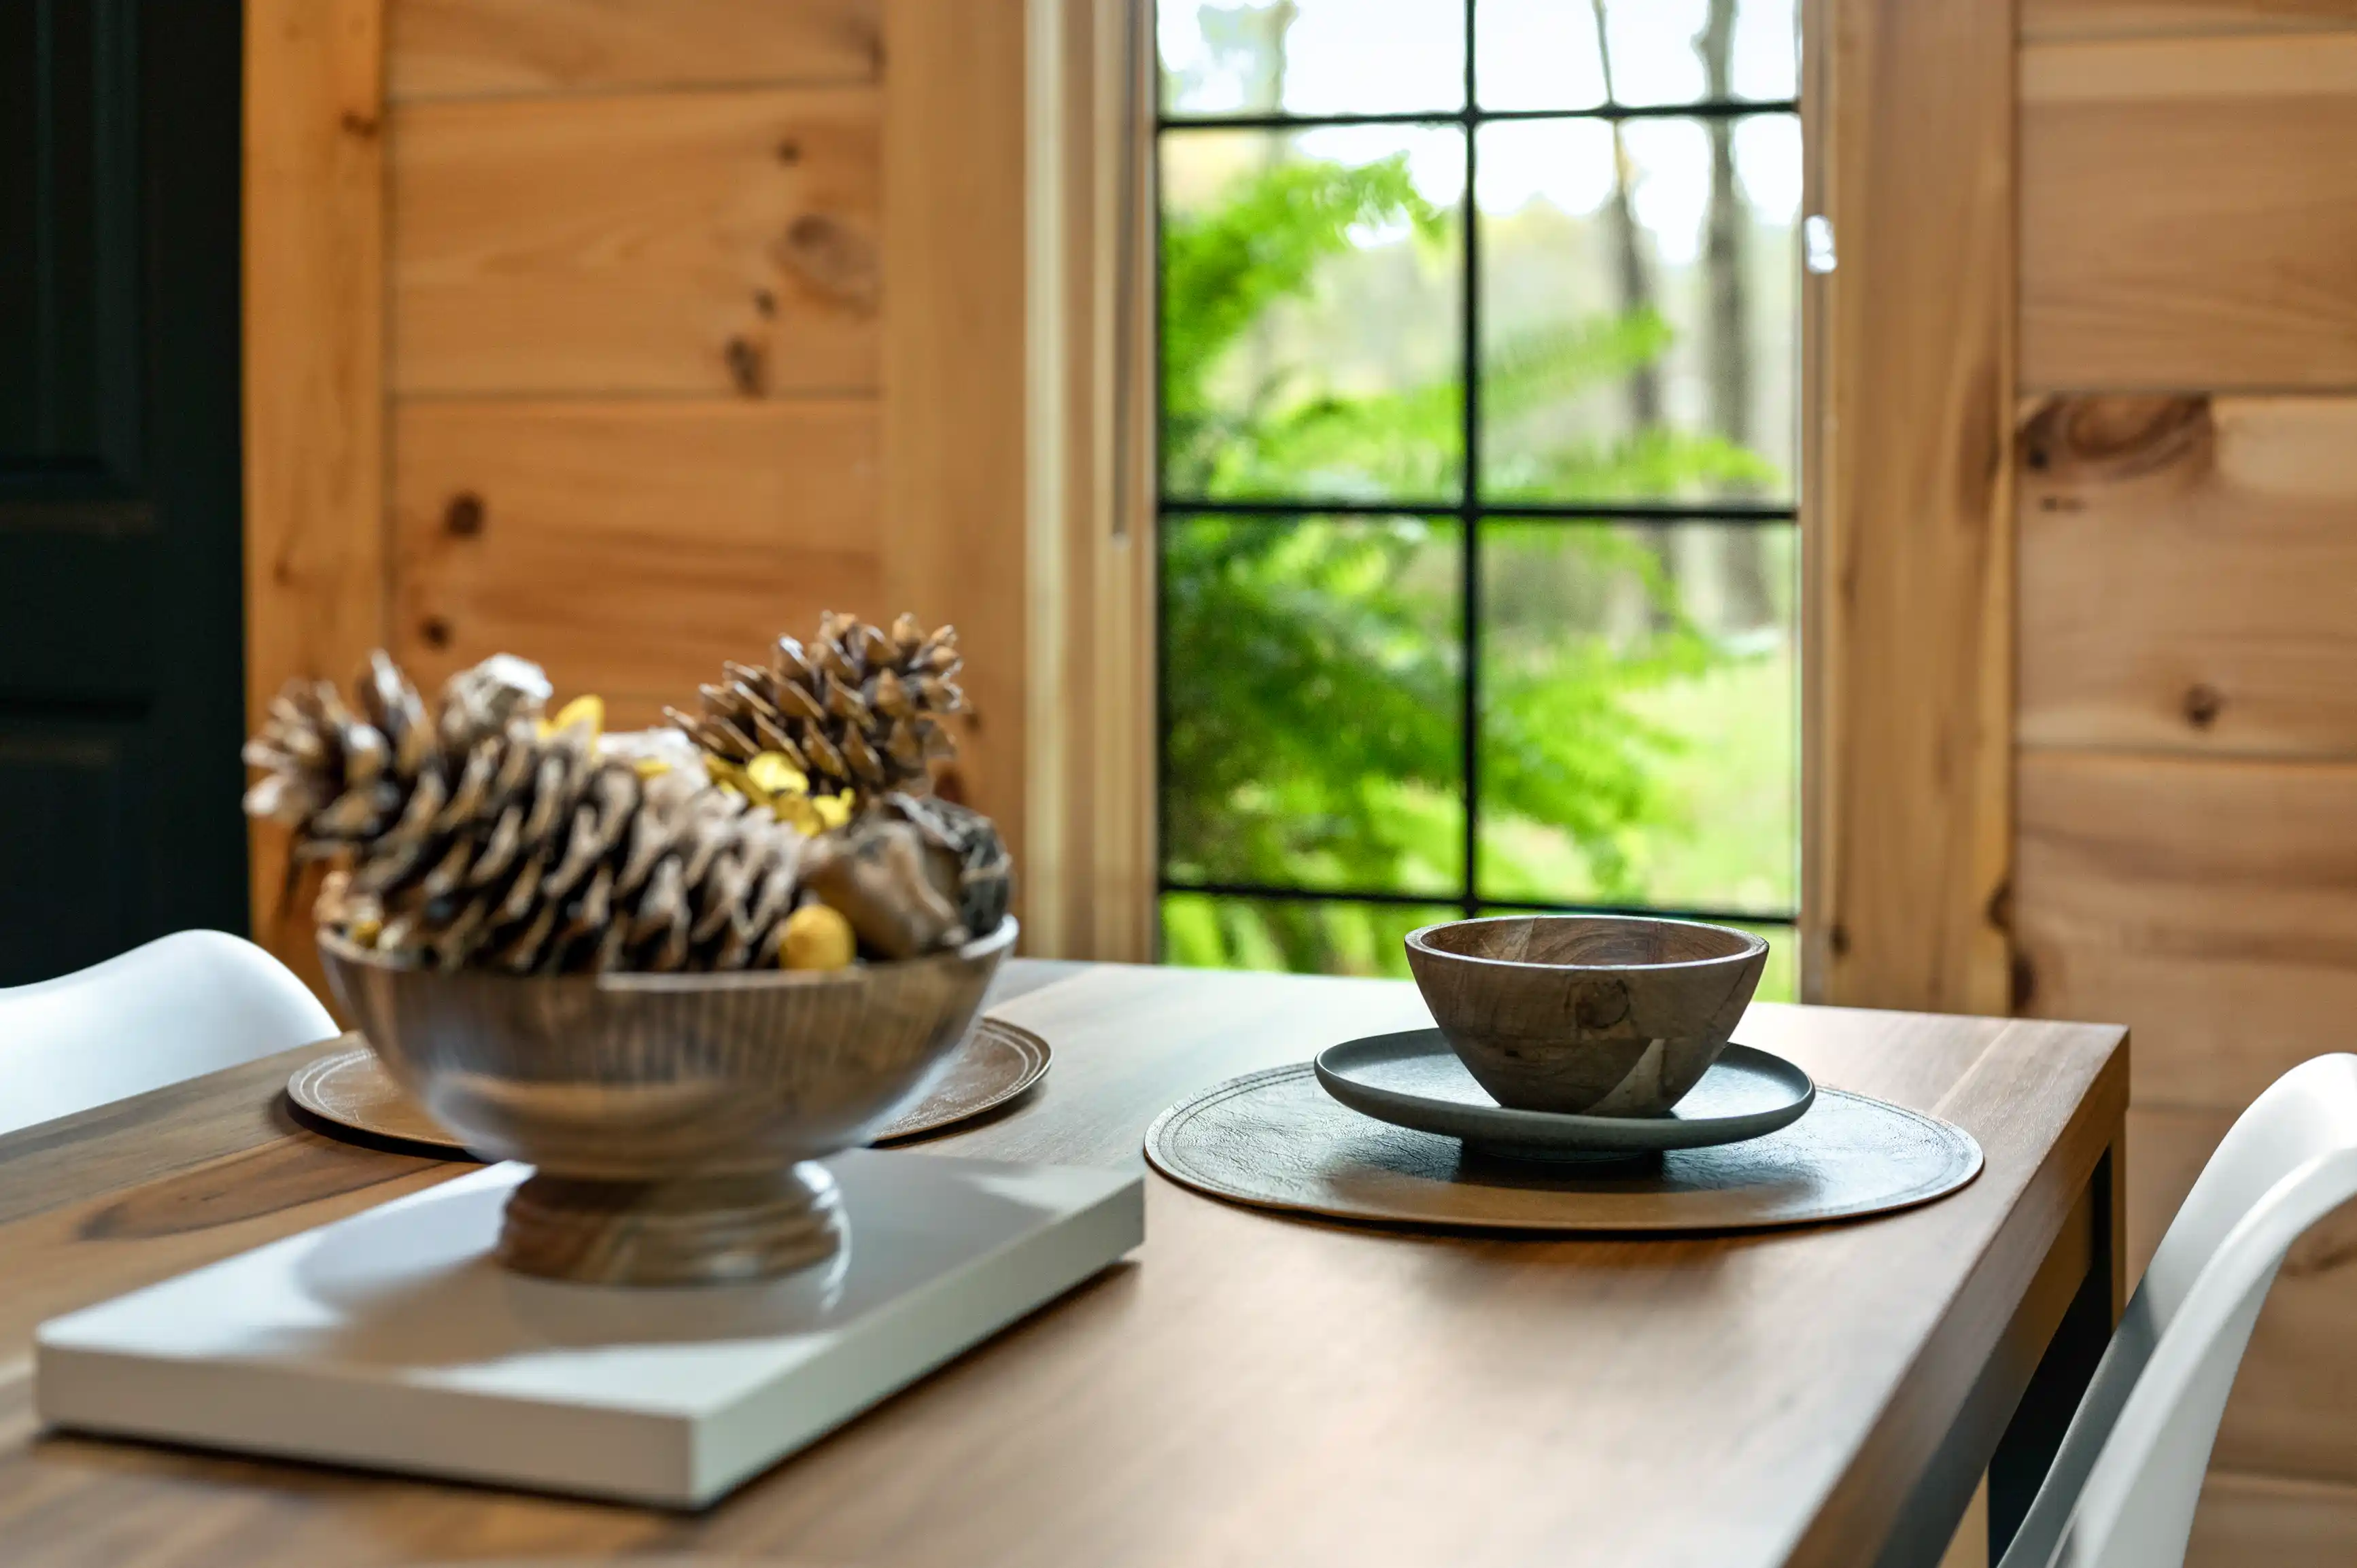 A cozy dining area with a wooden table set with a bowl and plate, a centerpiece of pine cones, and a view of greenery through a windowpane.